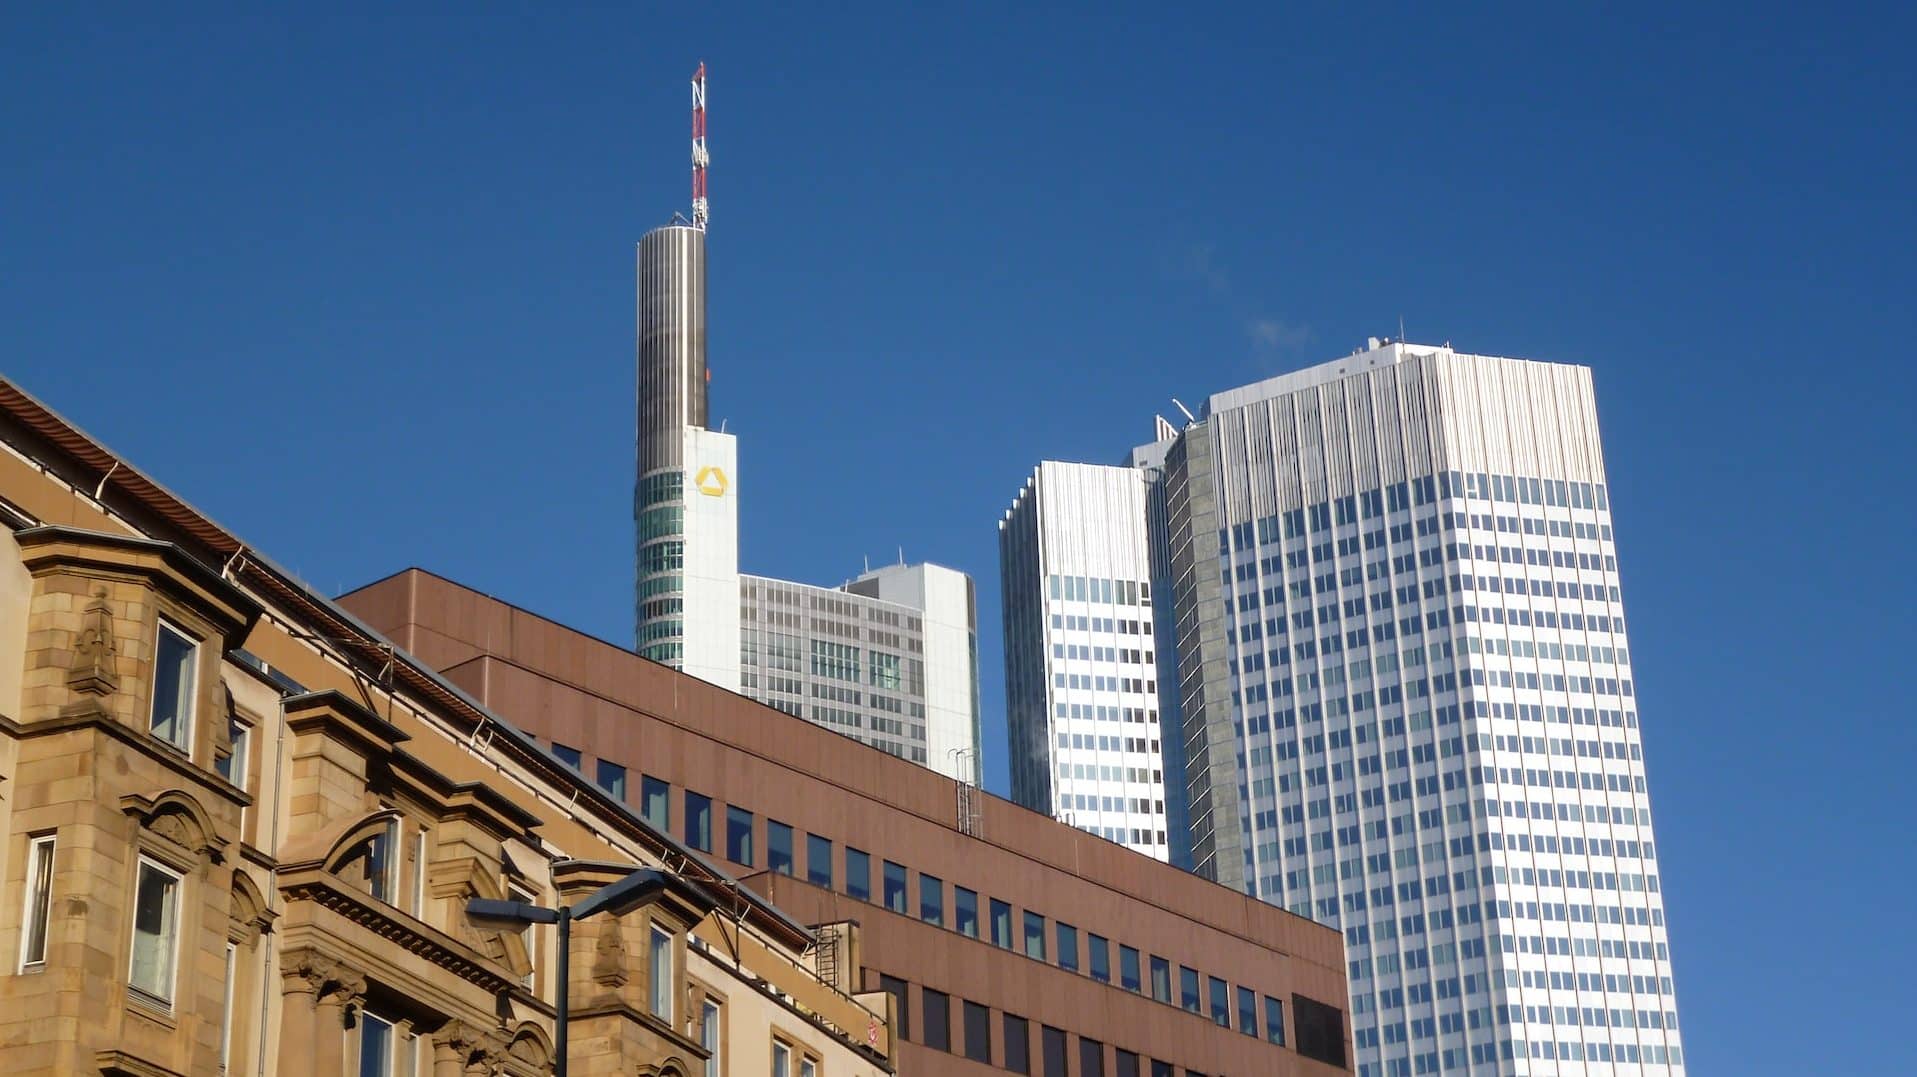 Dominating the city's skyline, the Commerzbank tower is one of the tallest in the EU